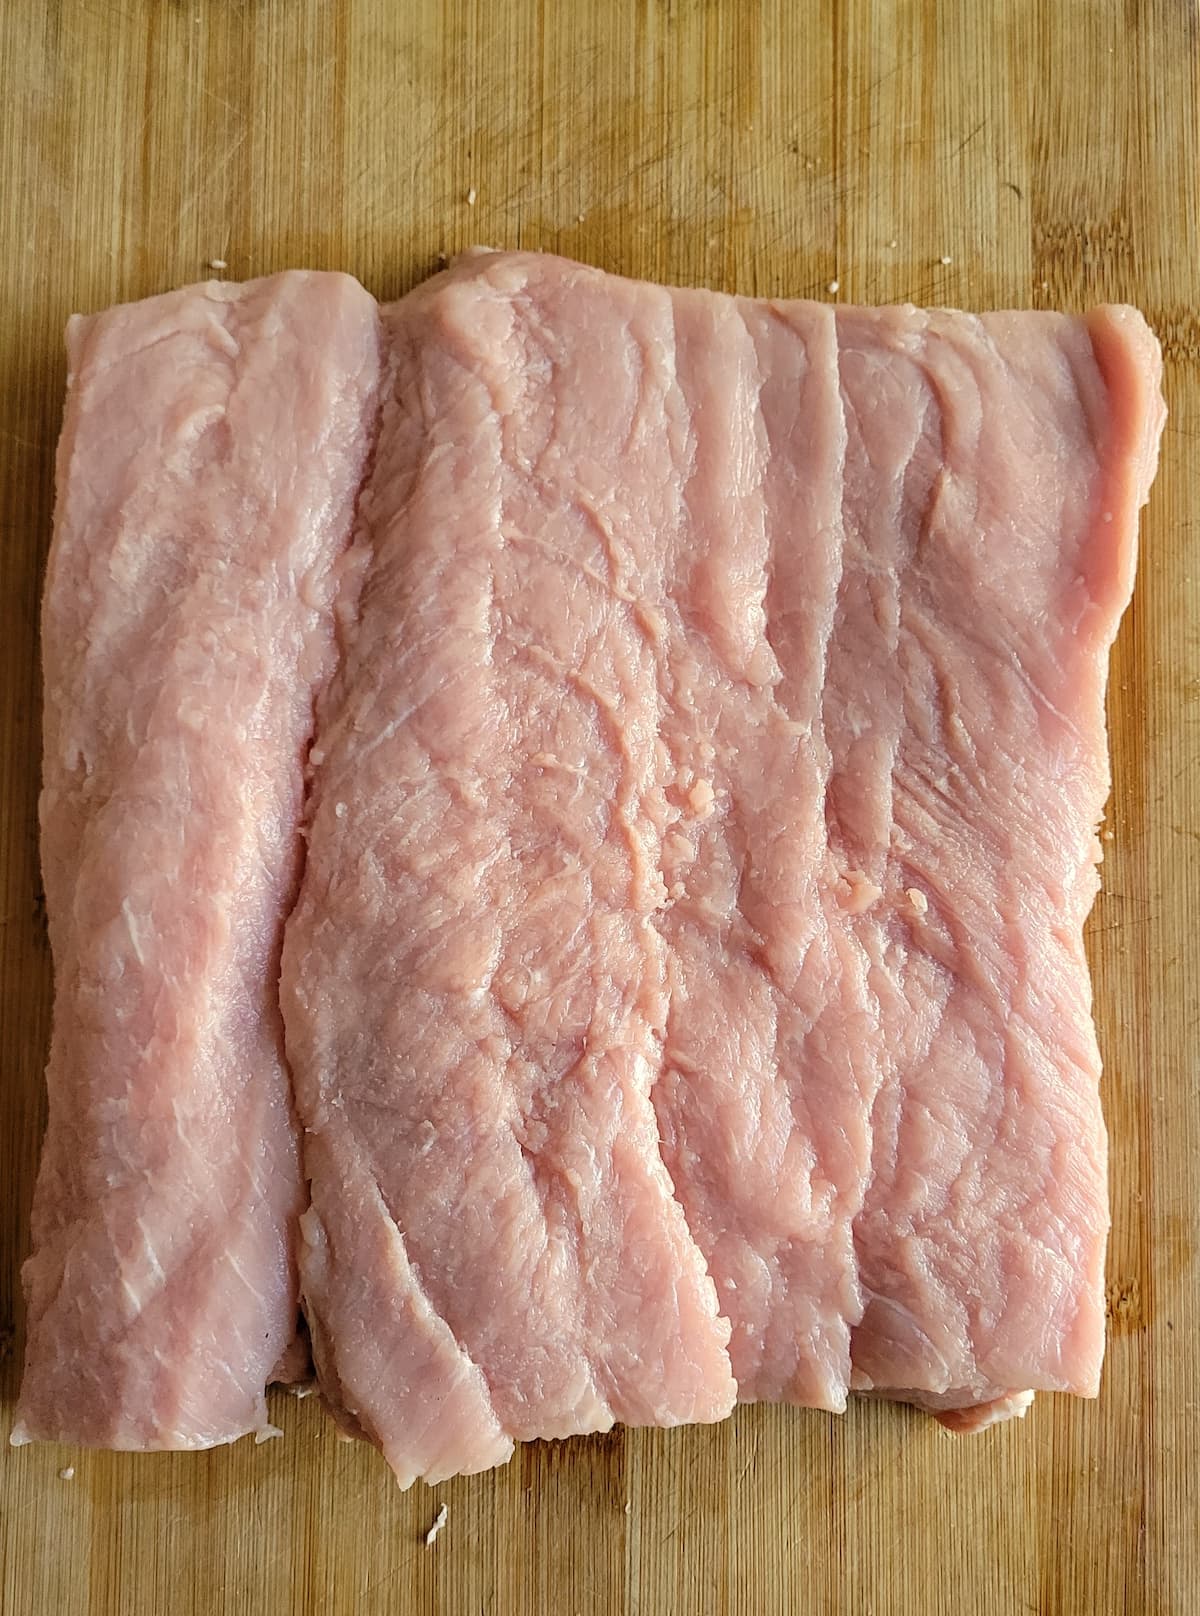 flattened out piece of pork on a cutting board